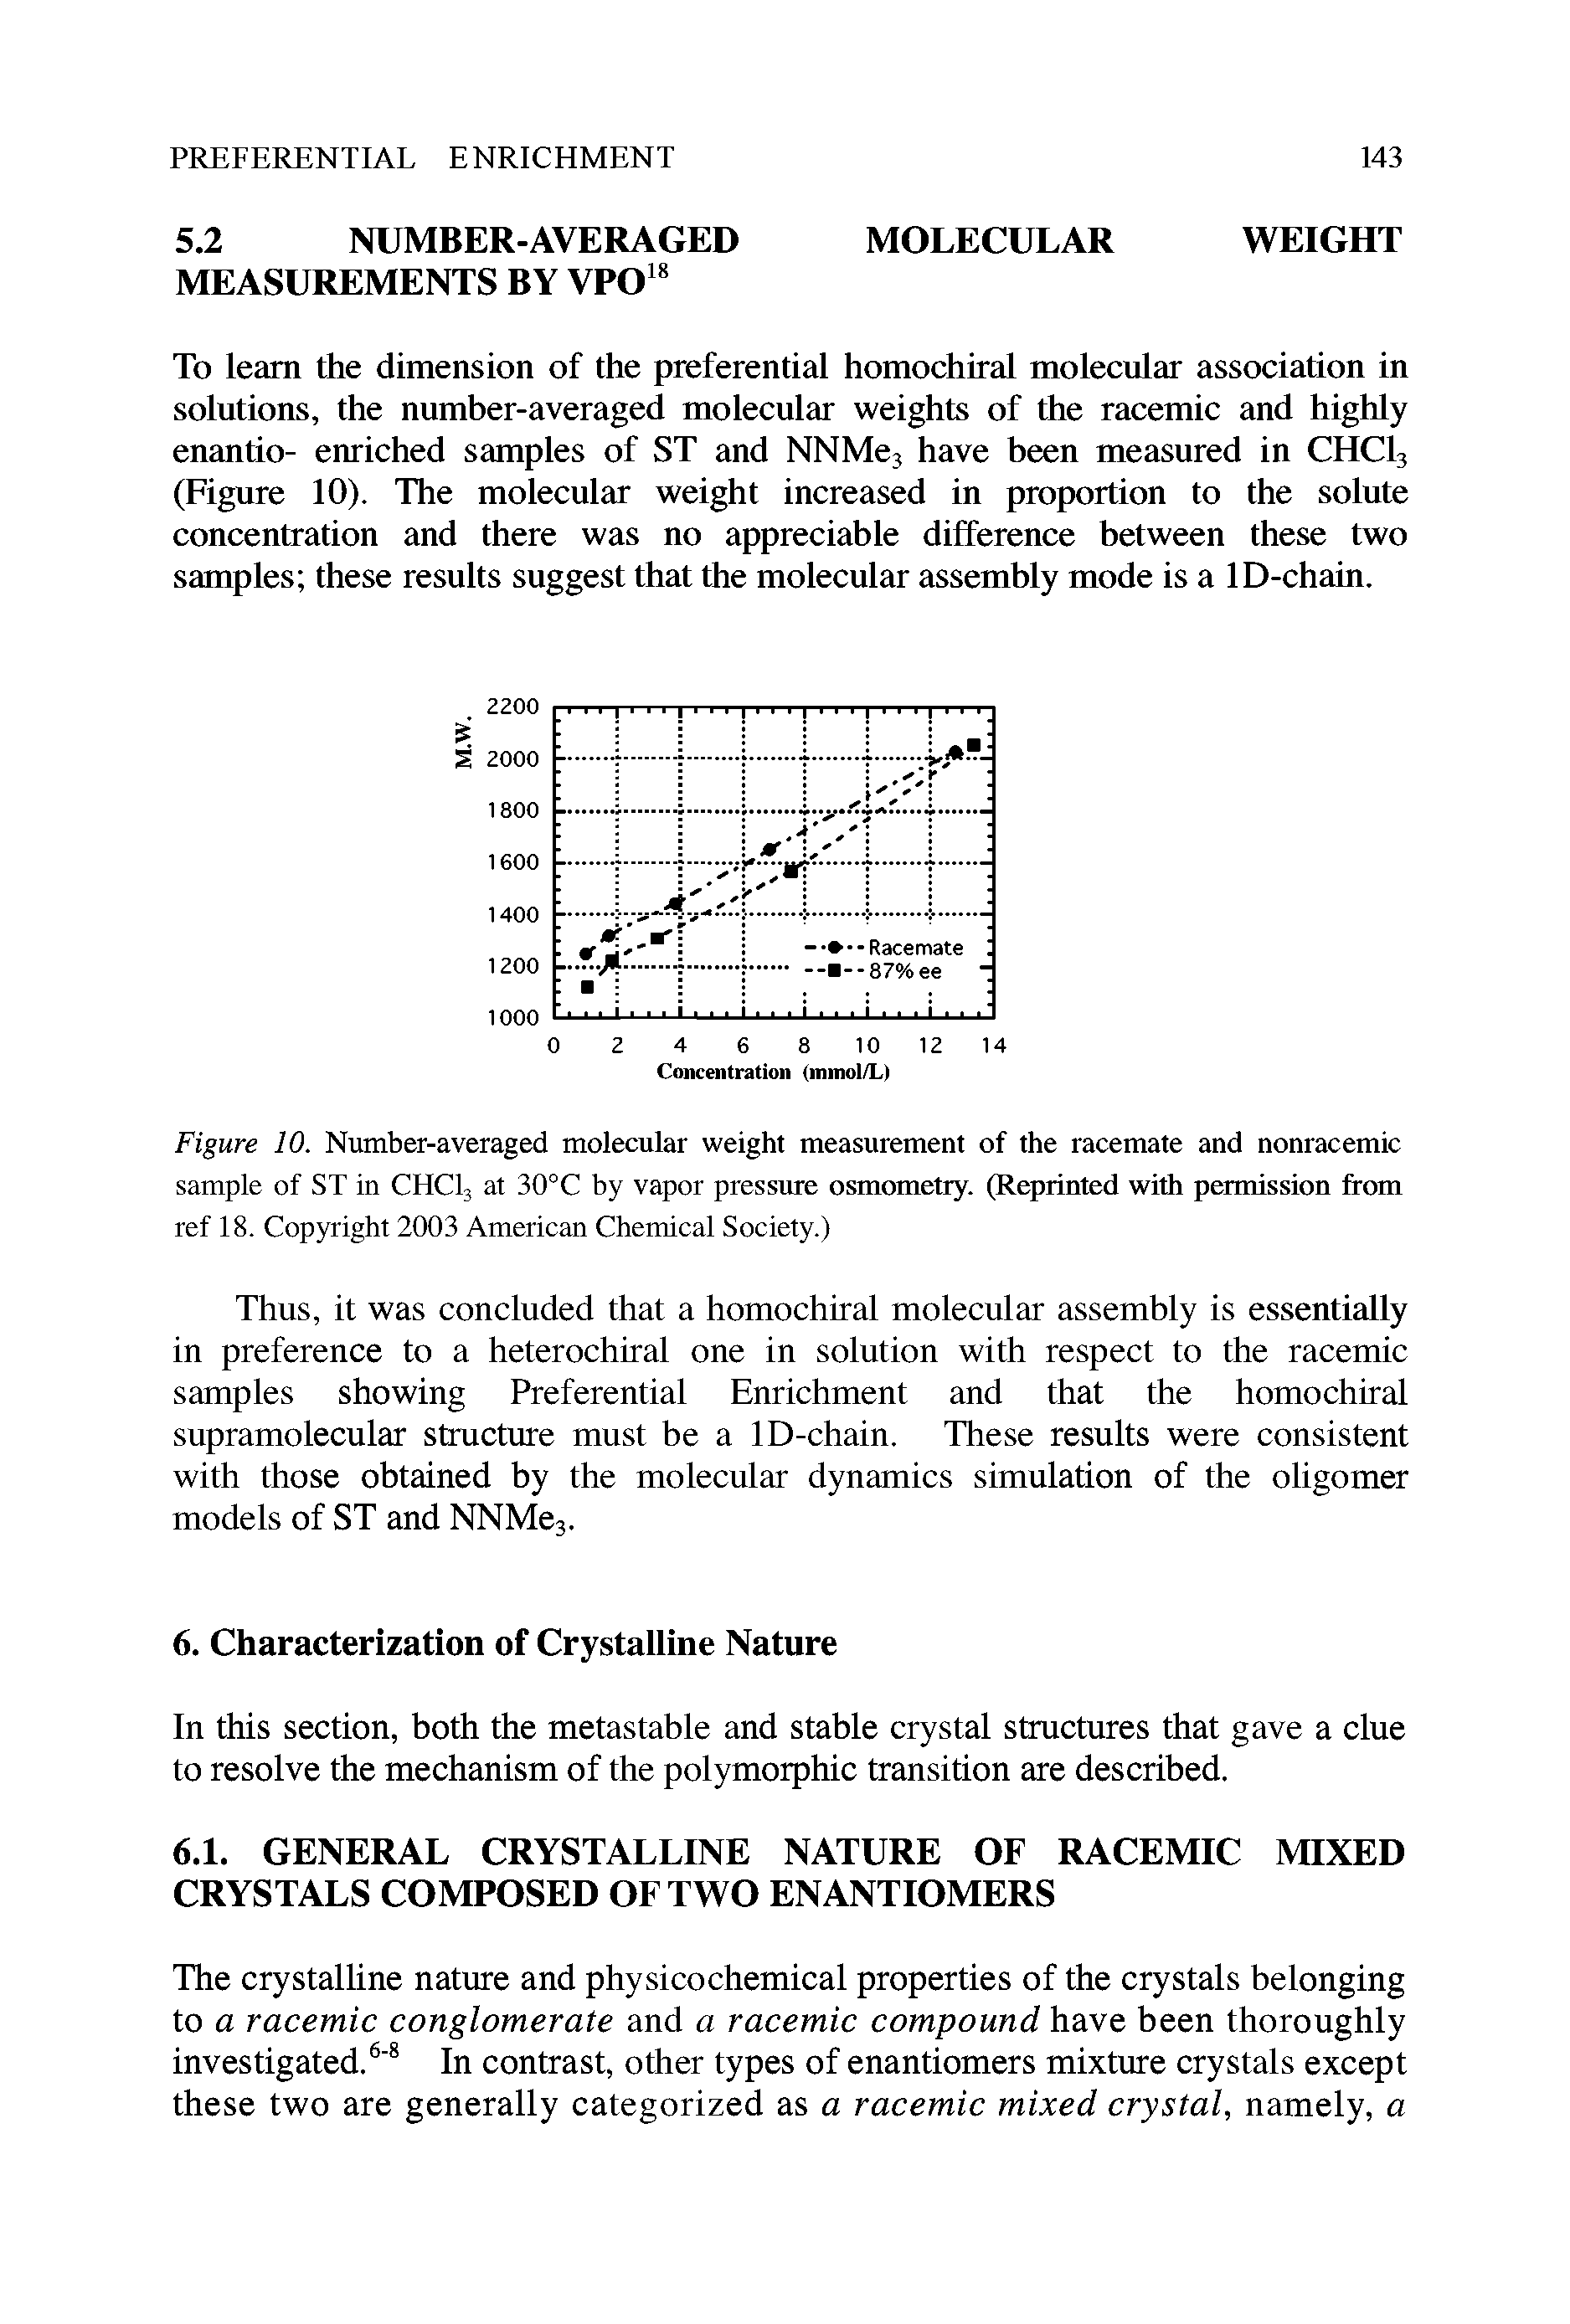 Figure 10. Number-averaged molecular weight measurement of the racemate and nonracemic sample of ST in CHC13 at 30°C by vapor pressure osmometry. (Reprinted with permission from ref 18. Copyright 2003 American Chemical Society.)...